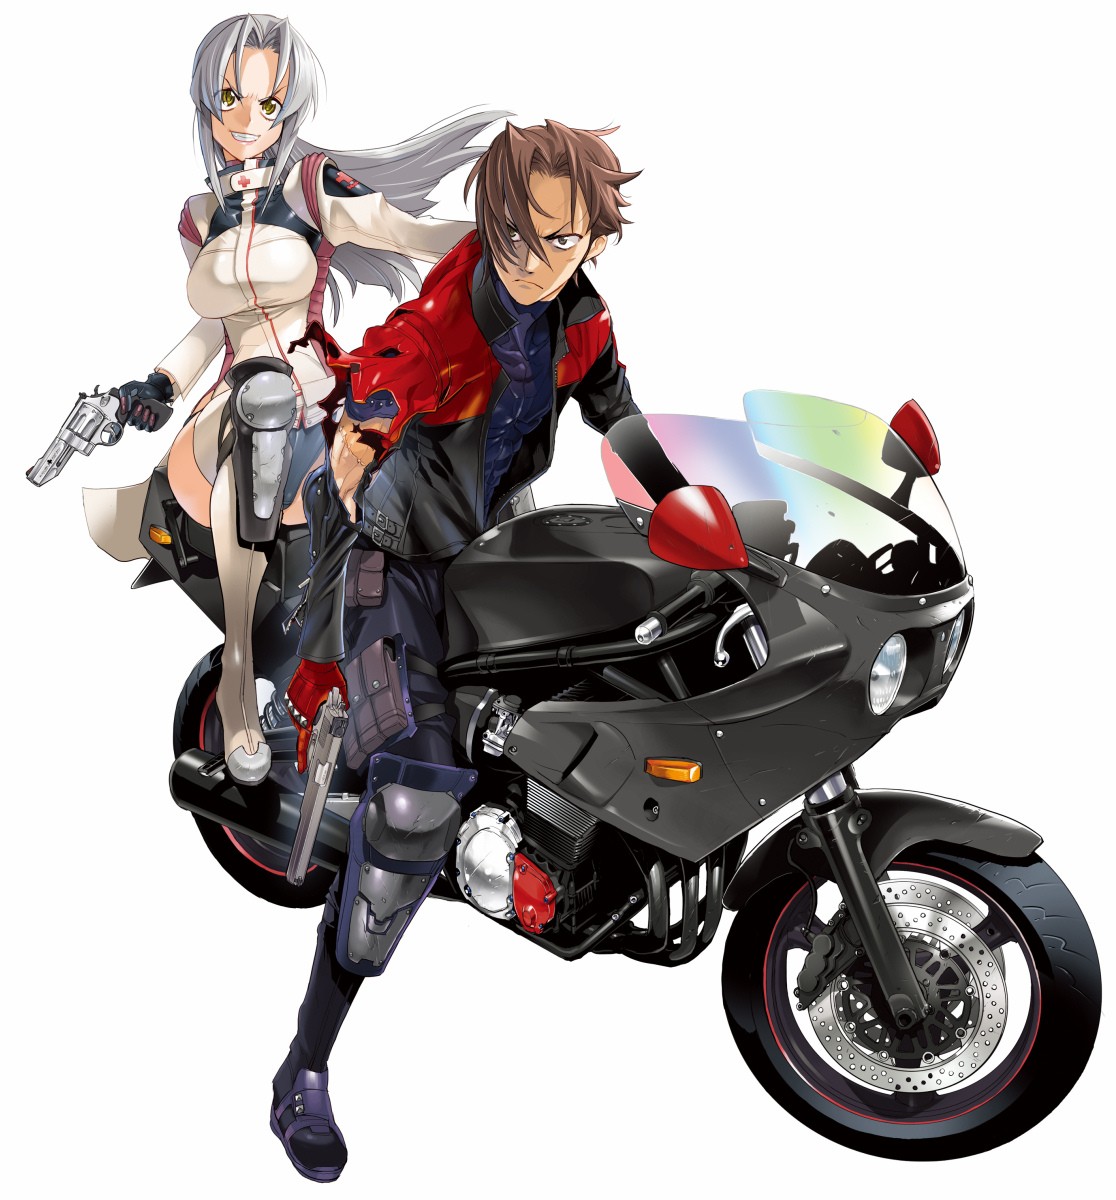 Anime 1116x1200 Triage X nurse outfit motorcycle black motorcycles anime anime girls white background simple background angry face vehicle girls with guns revolver women with motorcycles